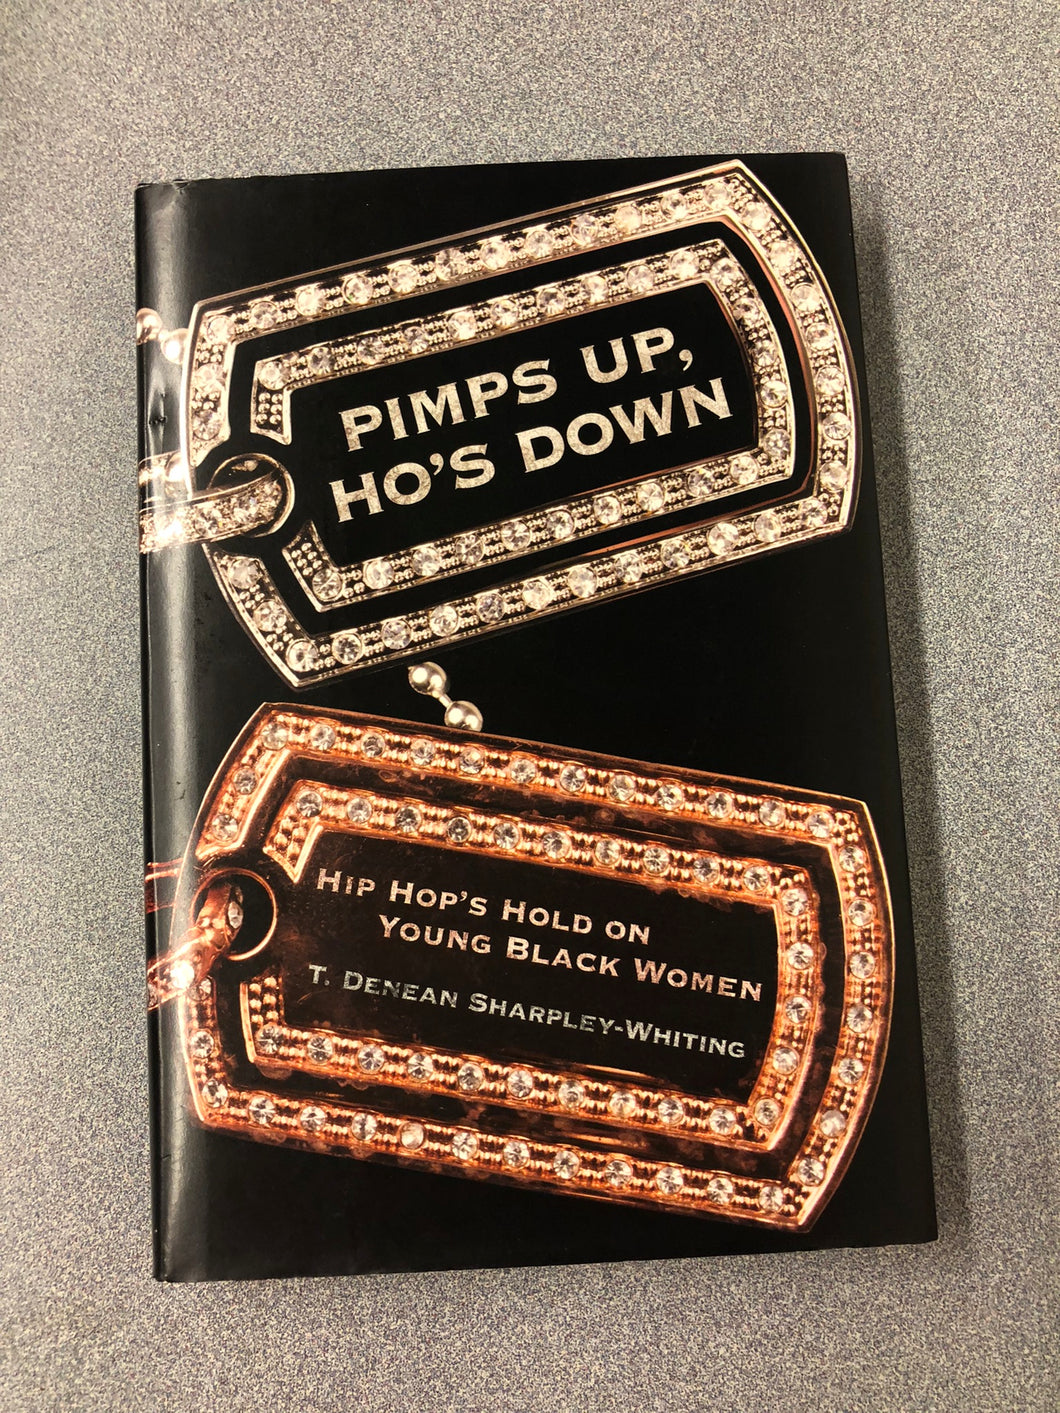 Pimps Up, Ho's Down: Hip Hop's Hold on Young Black Women, Sharpley-Whiting, T. Denean, [2007] MU 8/22